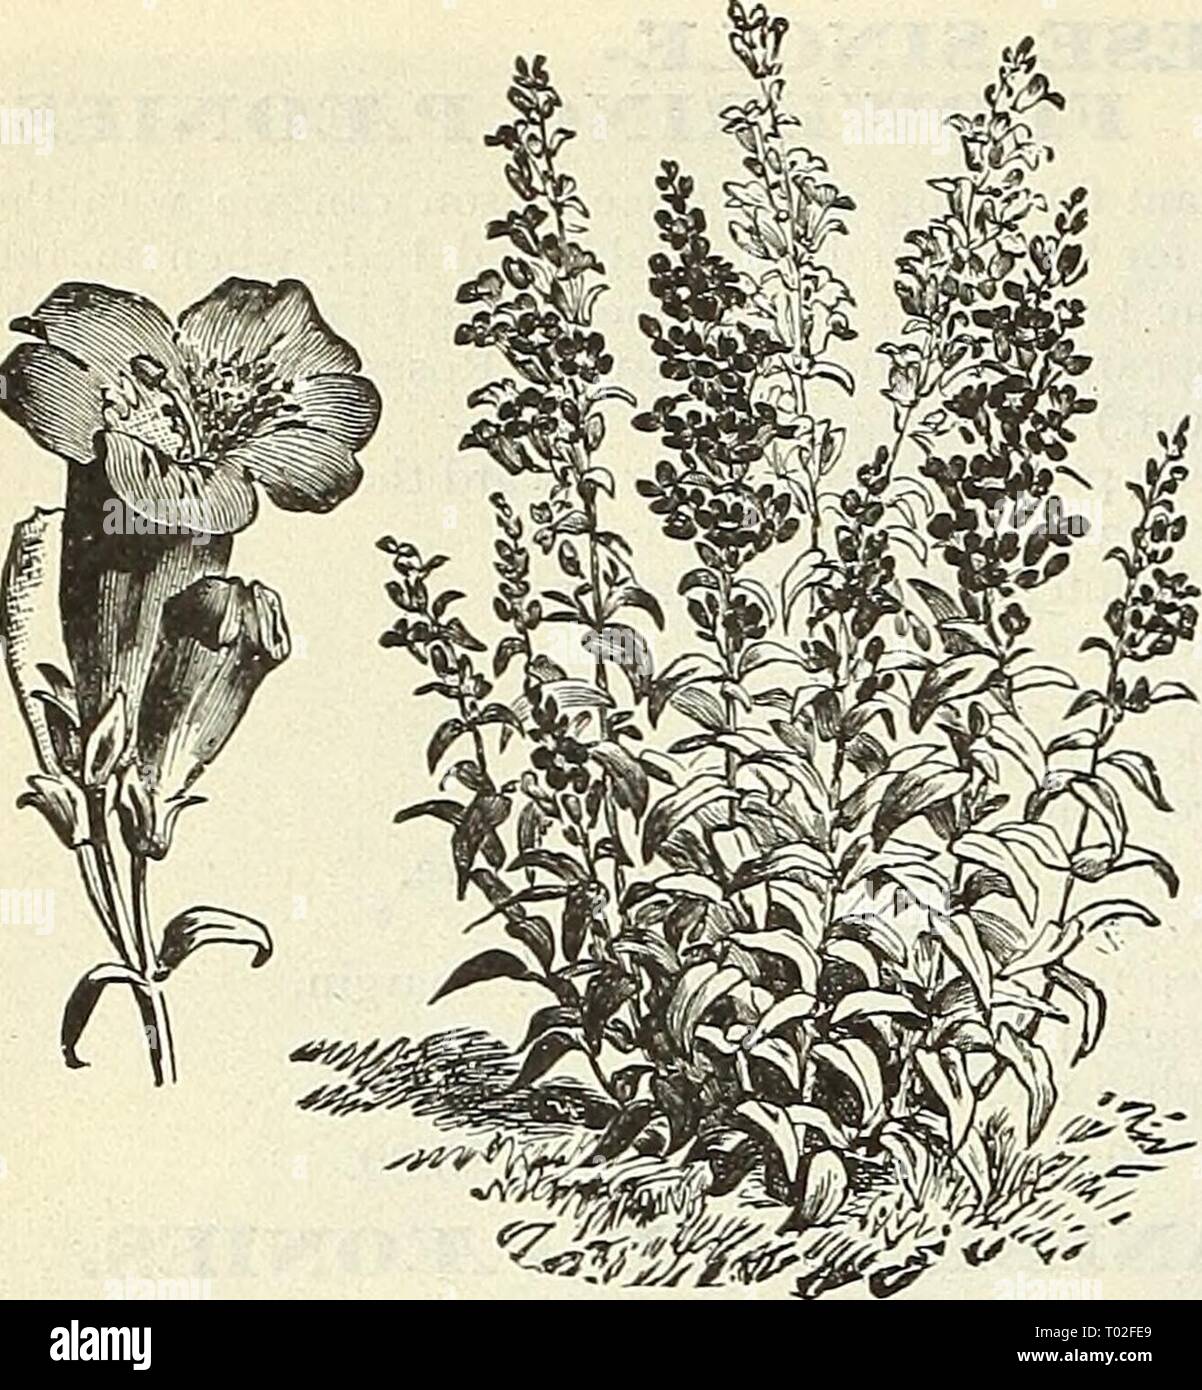 Dreer's garden calendar : 1903 . dreersgardencale1903henr Year: 1903  IHmRTADREIR MADEUWWilf HARDY PERENMIAL PLANTS    Pbntstemon Gentianoidbs. PHL03IIS. (Jerusalem Sage.) Fruticosa. Grows from 2 to 3 feet high, and bears whorls of attractive yellow flowers in June and July. 20 cts. each; $2.00 per dozen. PHYSOSTEGIA. (False Dragon Head.) One of the most beautiful of our midsummer-flowering per- ennials, forming dense bushes 3 to 4 feet high, bearing spikes of delicate tubular flowers not un- like a gigantic heather. (See cut.) Virginica. Bright but soft pink. — Alba. Pure white; very fine. 15 Stock Photo